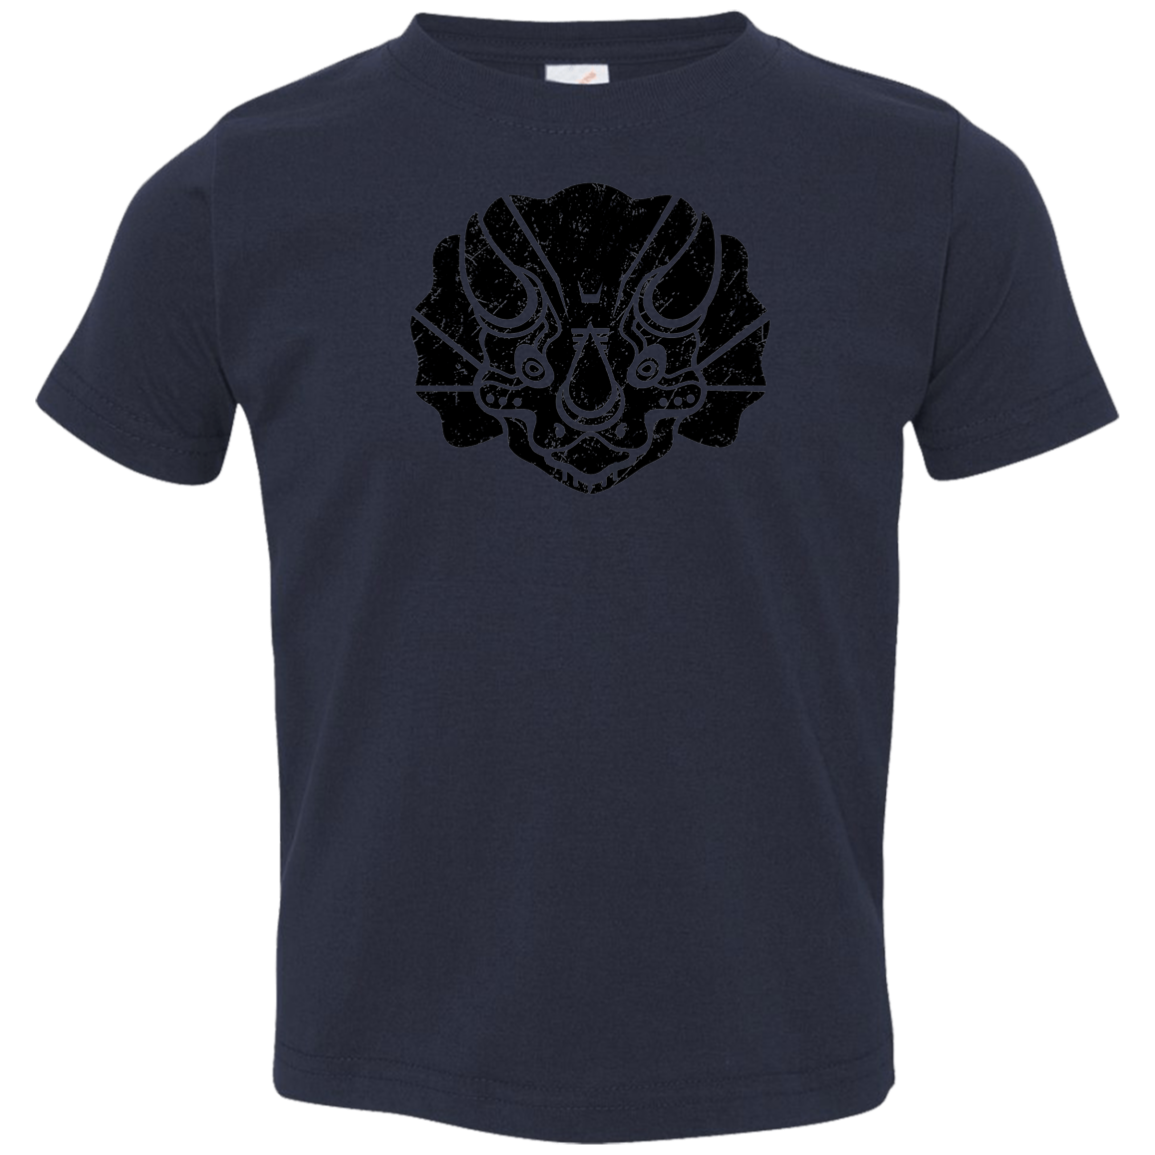 Black Distressed Emblem T-Shirt for Toddlers (Triceratops/Trips)